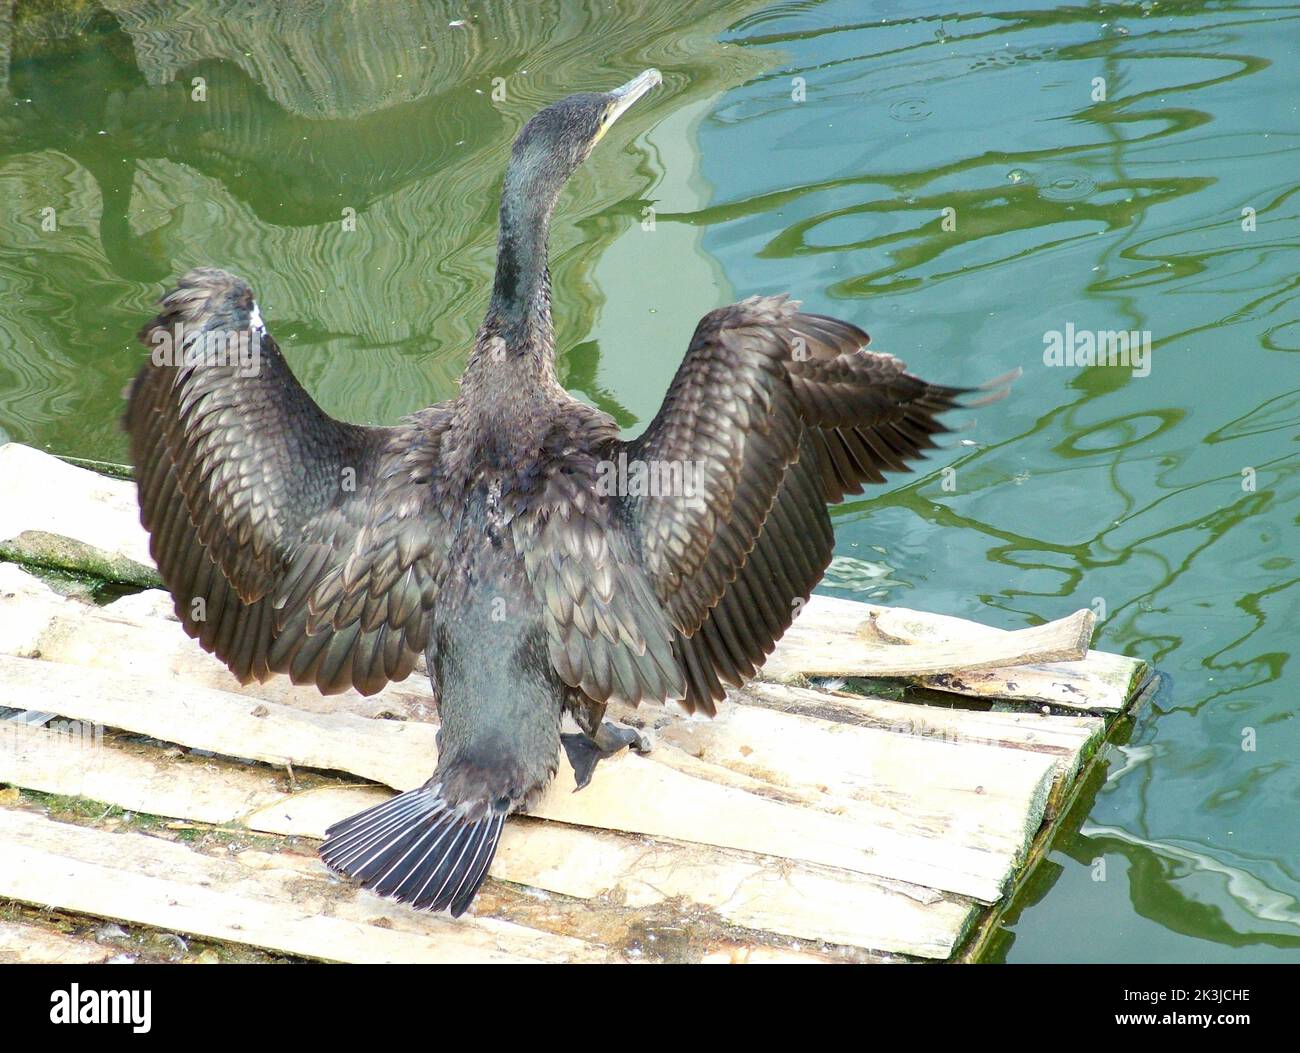 A black cormorant on a wooden deck in the water Stock Photo